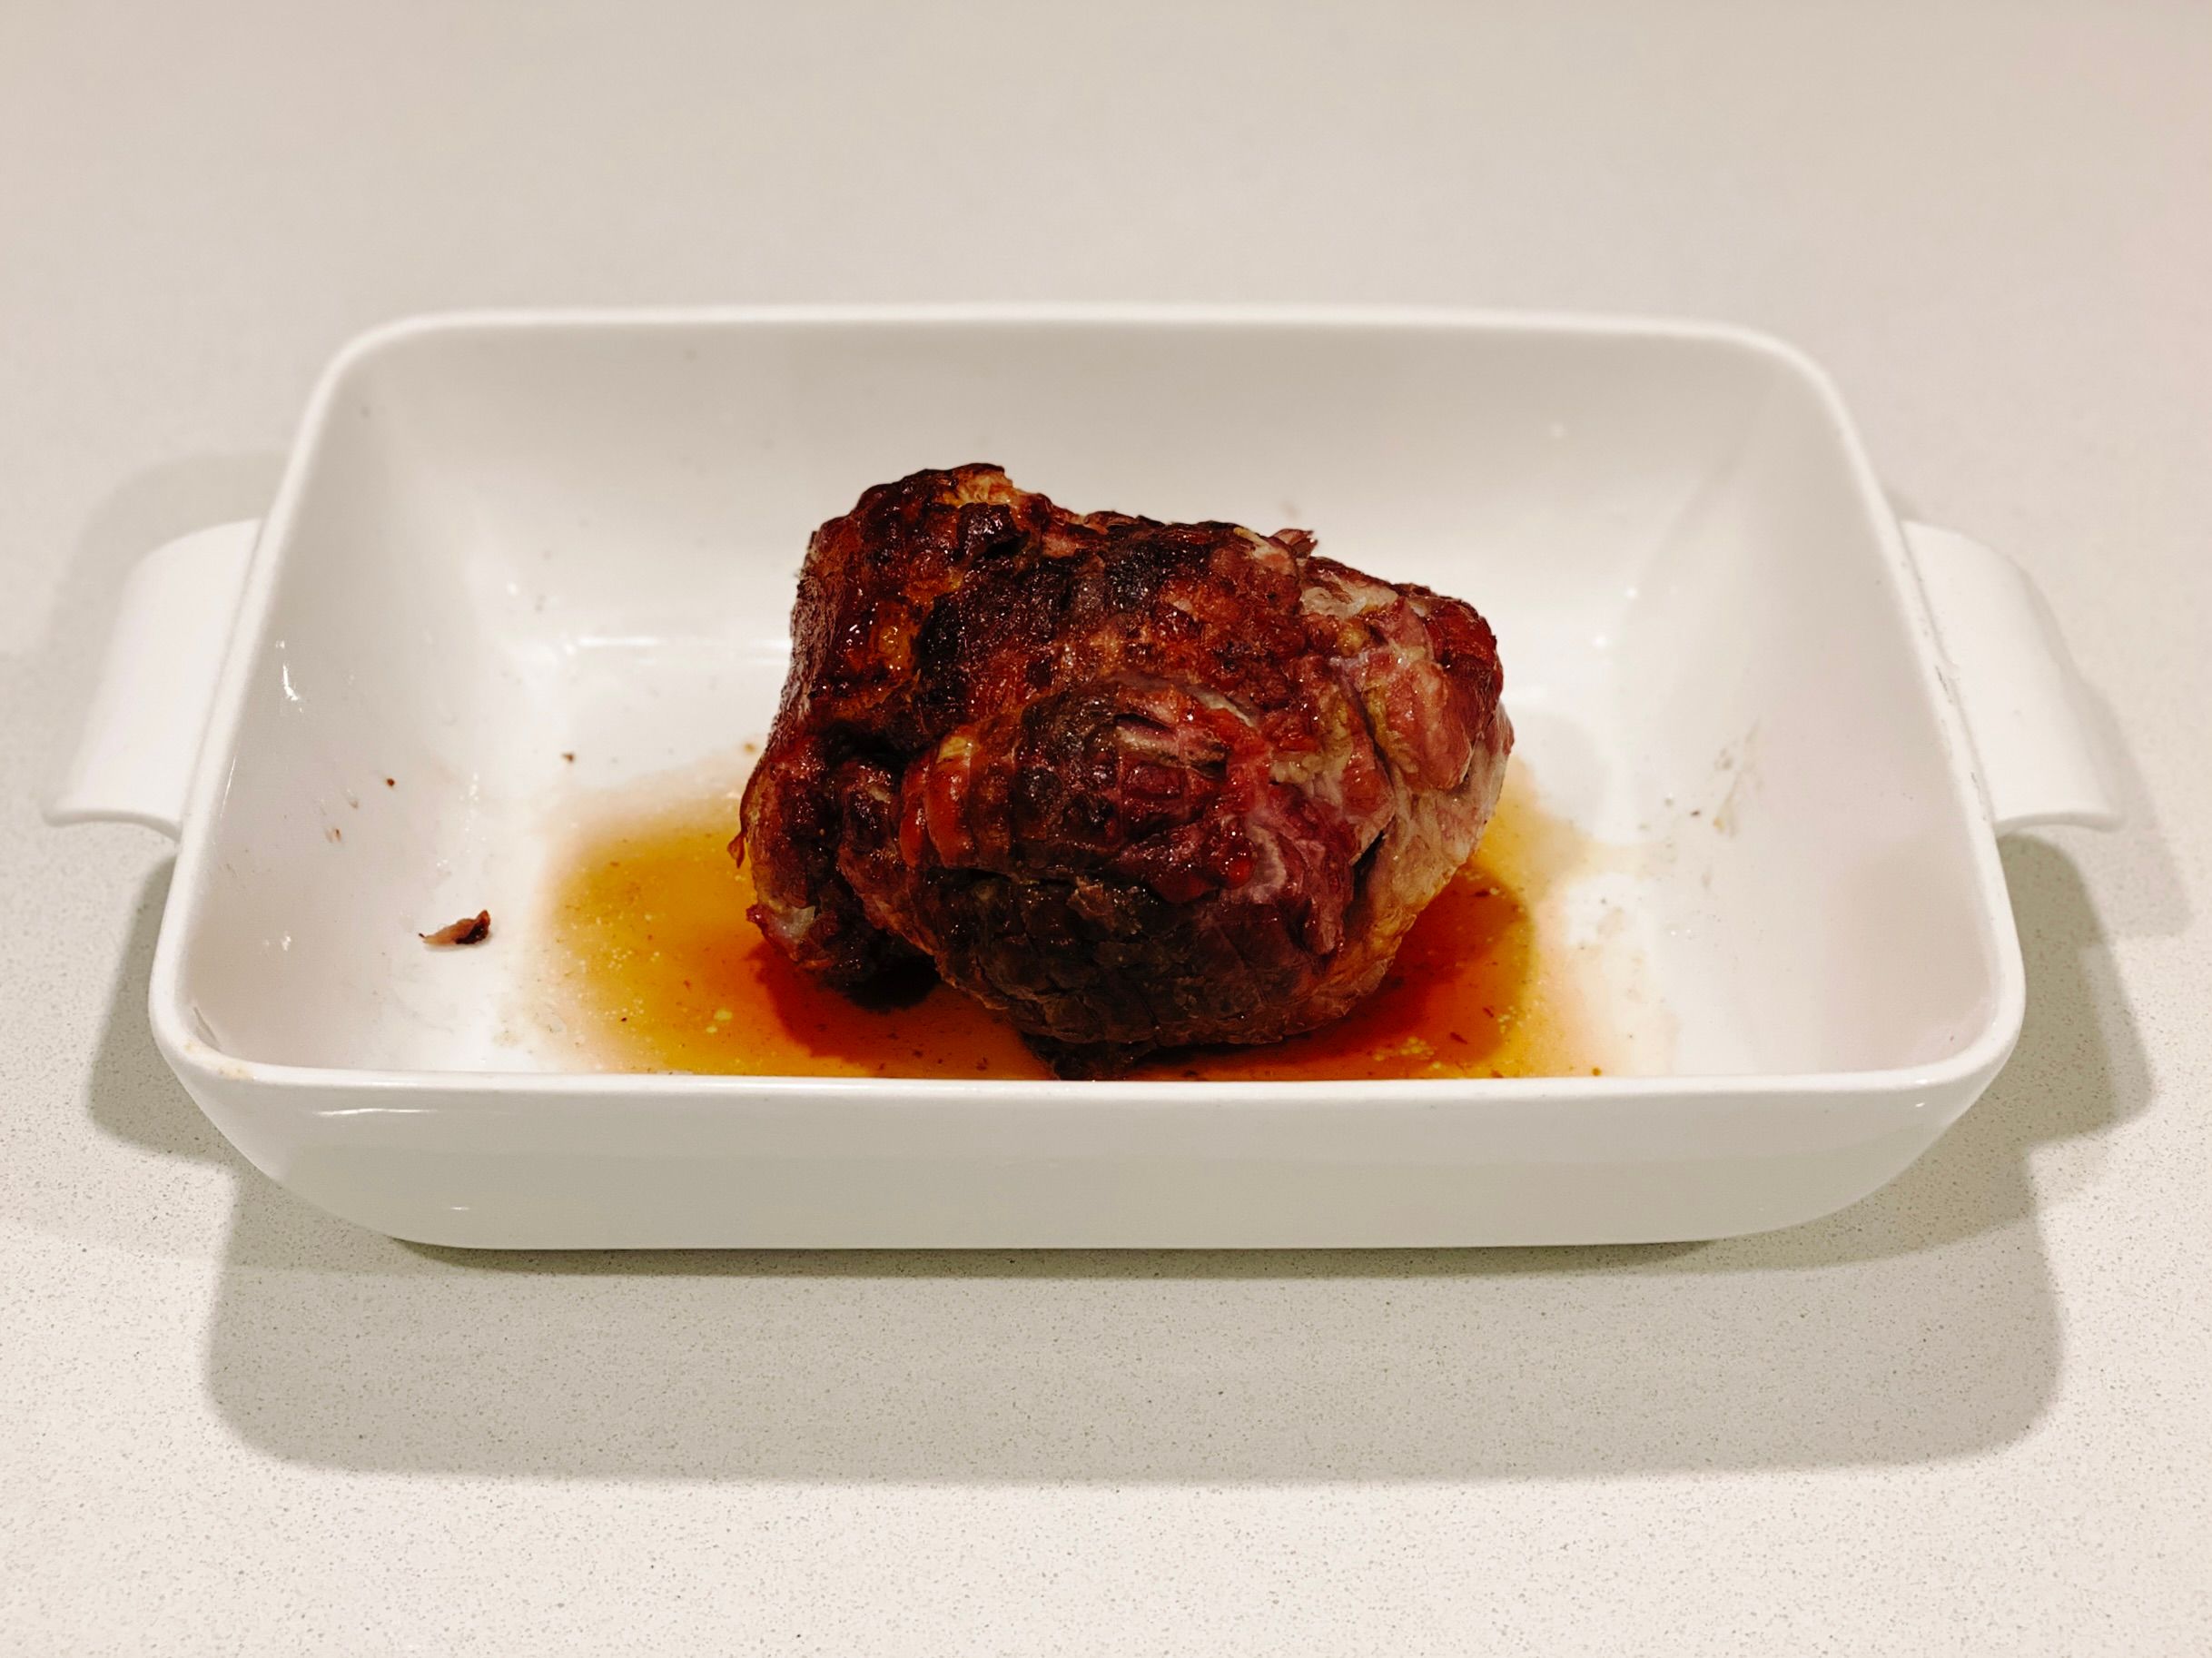 A photo of a small cooked pork roast sitting in a white casserole dish.